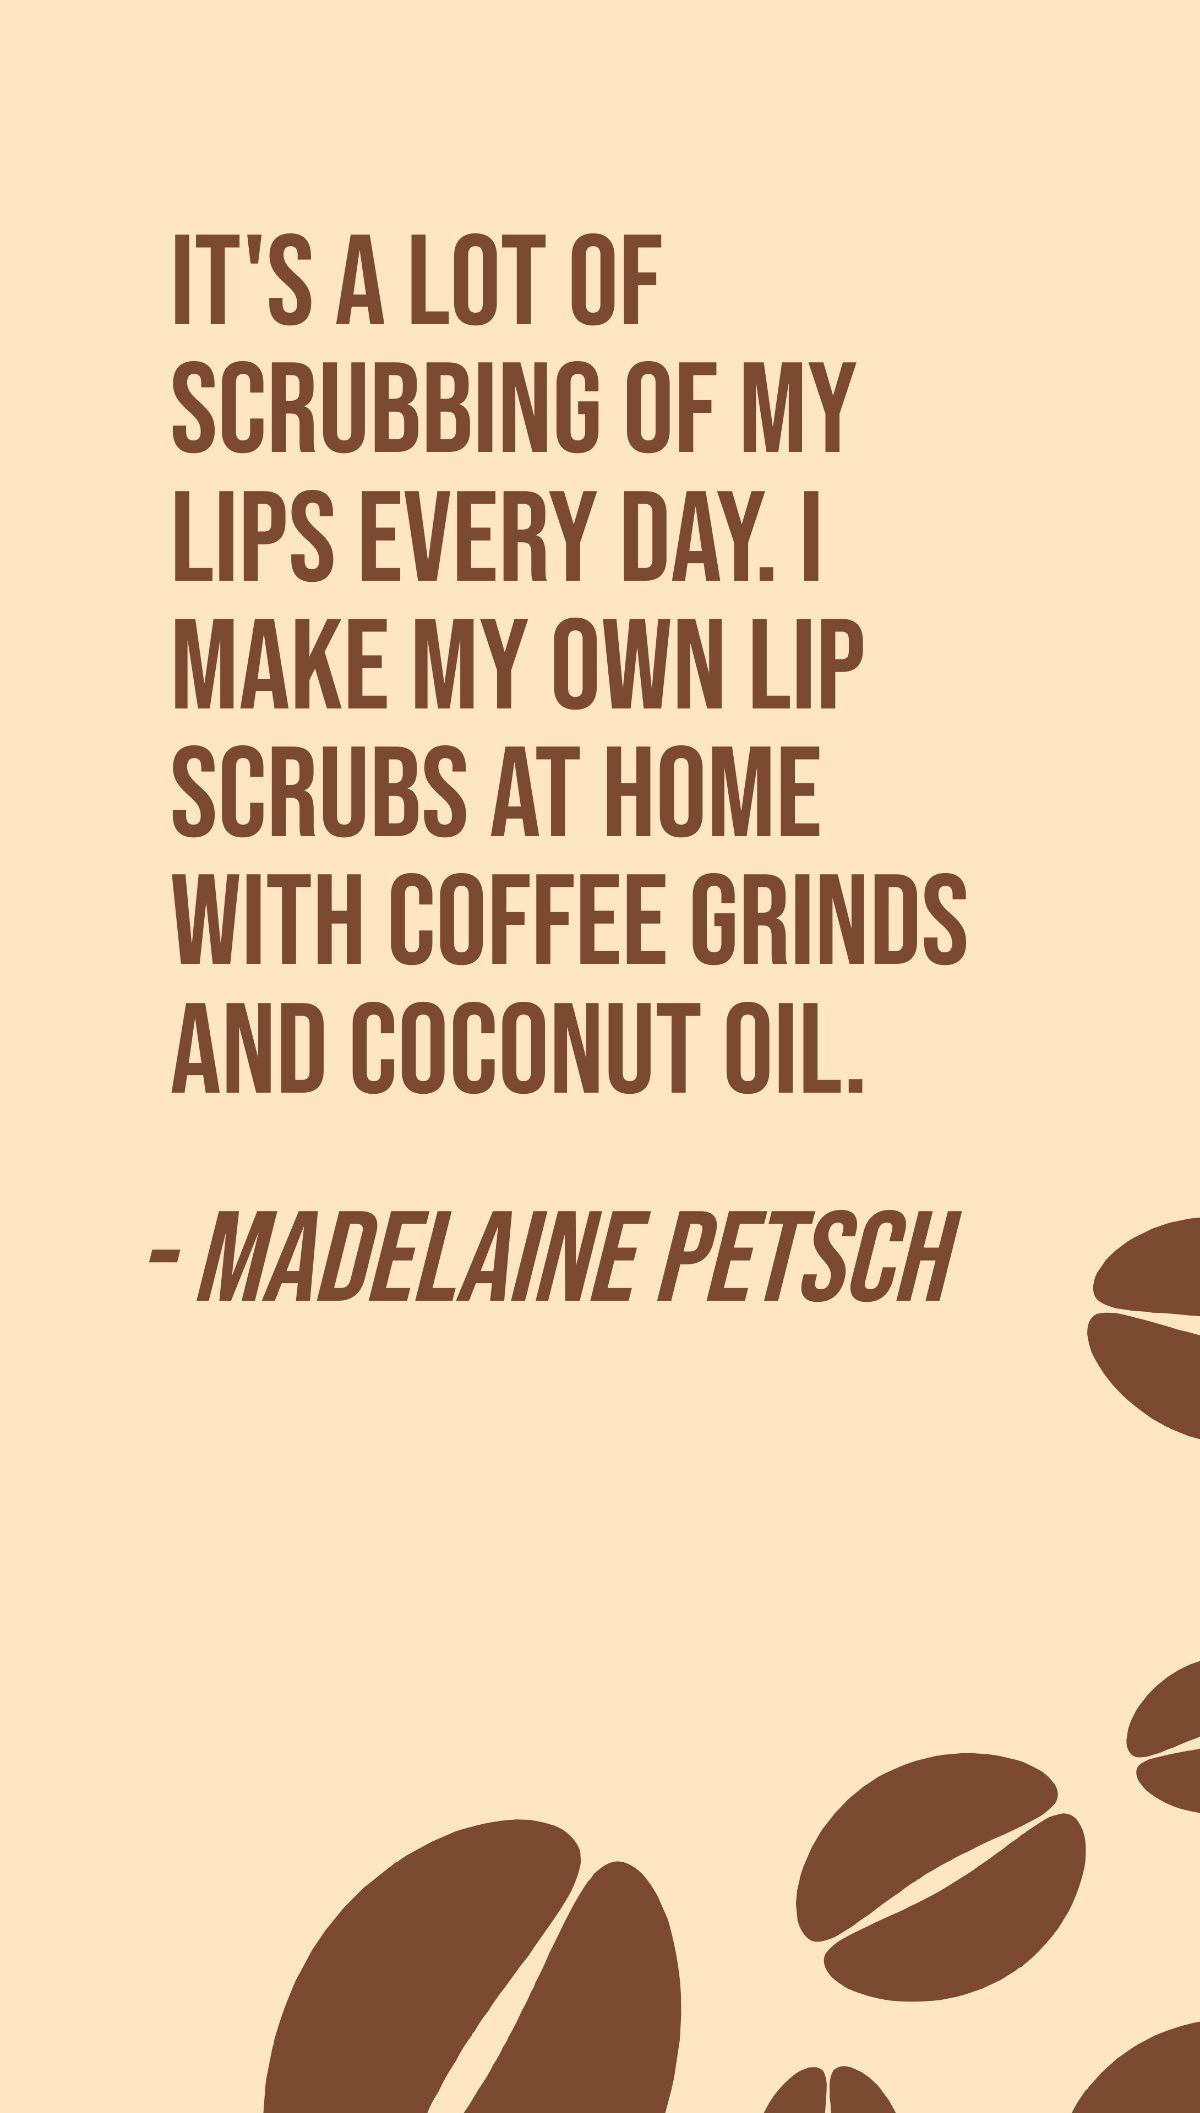 Madelaine Petsch - It's a lot of scrubbing of my lips every day. I make my own lip scrubs at home with coffee grinds and coconut oil. Template